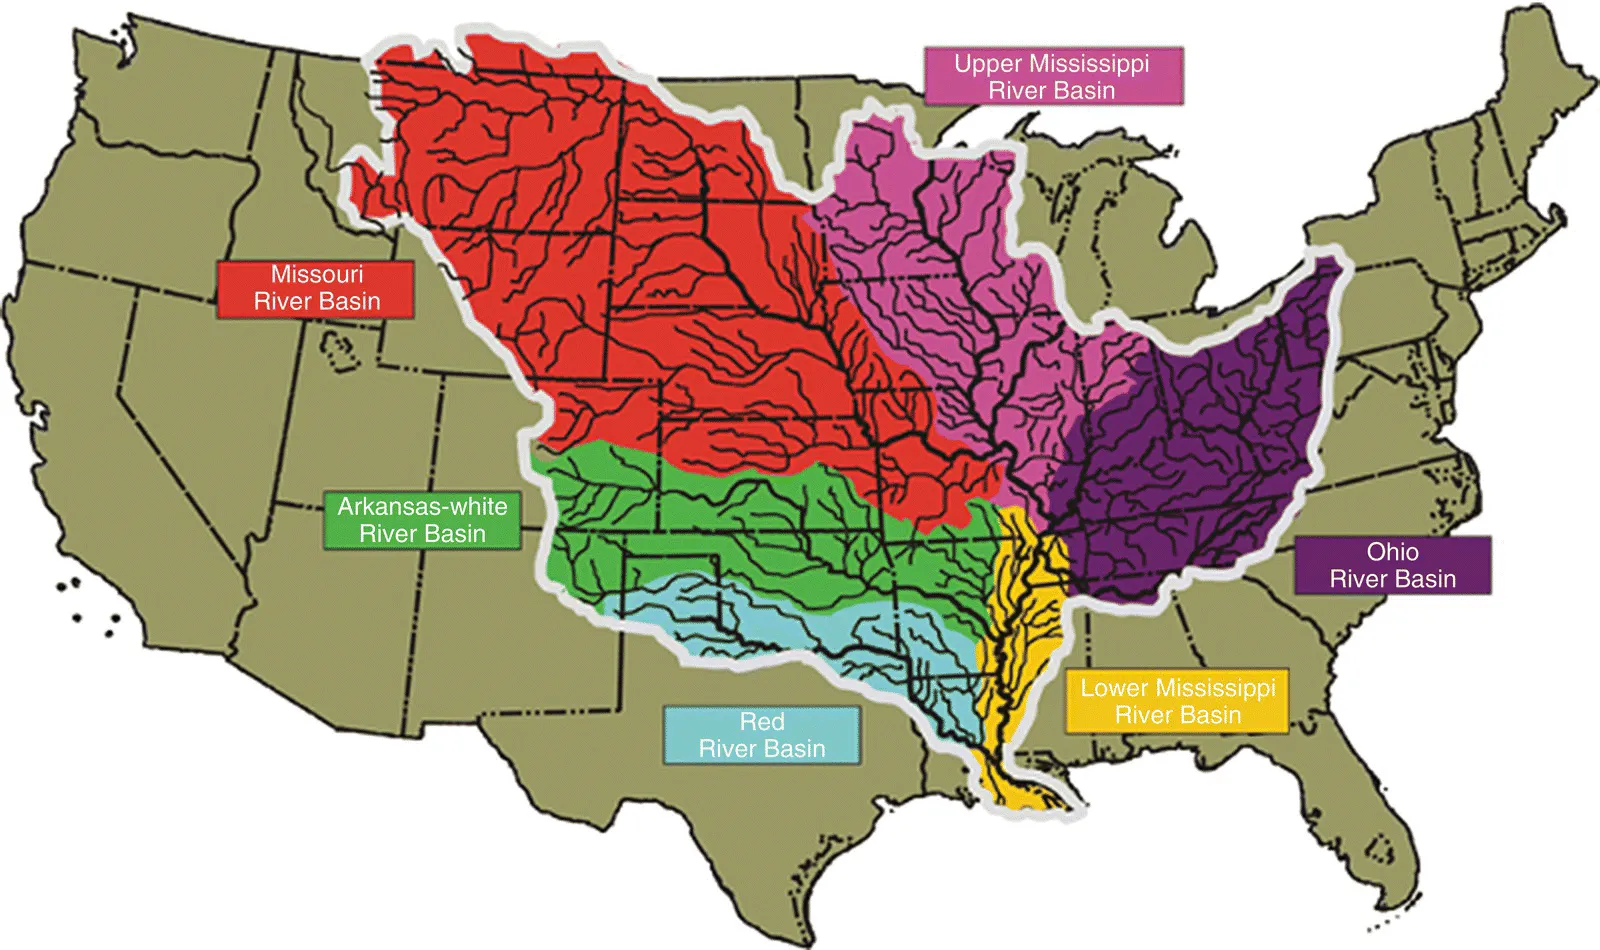 Map displaying lines with branches in shaded areas labeled Upper Mississippi River Basin, Ohio River Basin, Lower Mississippi River Basin, Red River Basin, Arkansas-white River Basin, and Missouri River Basin.